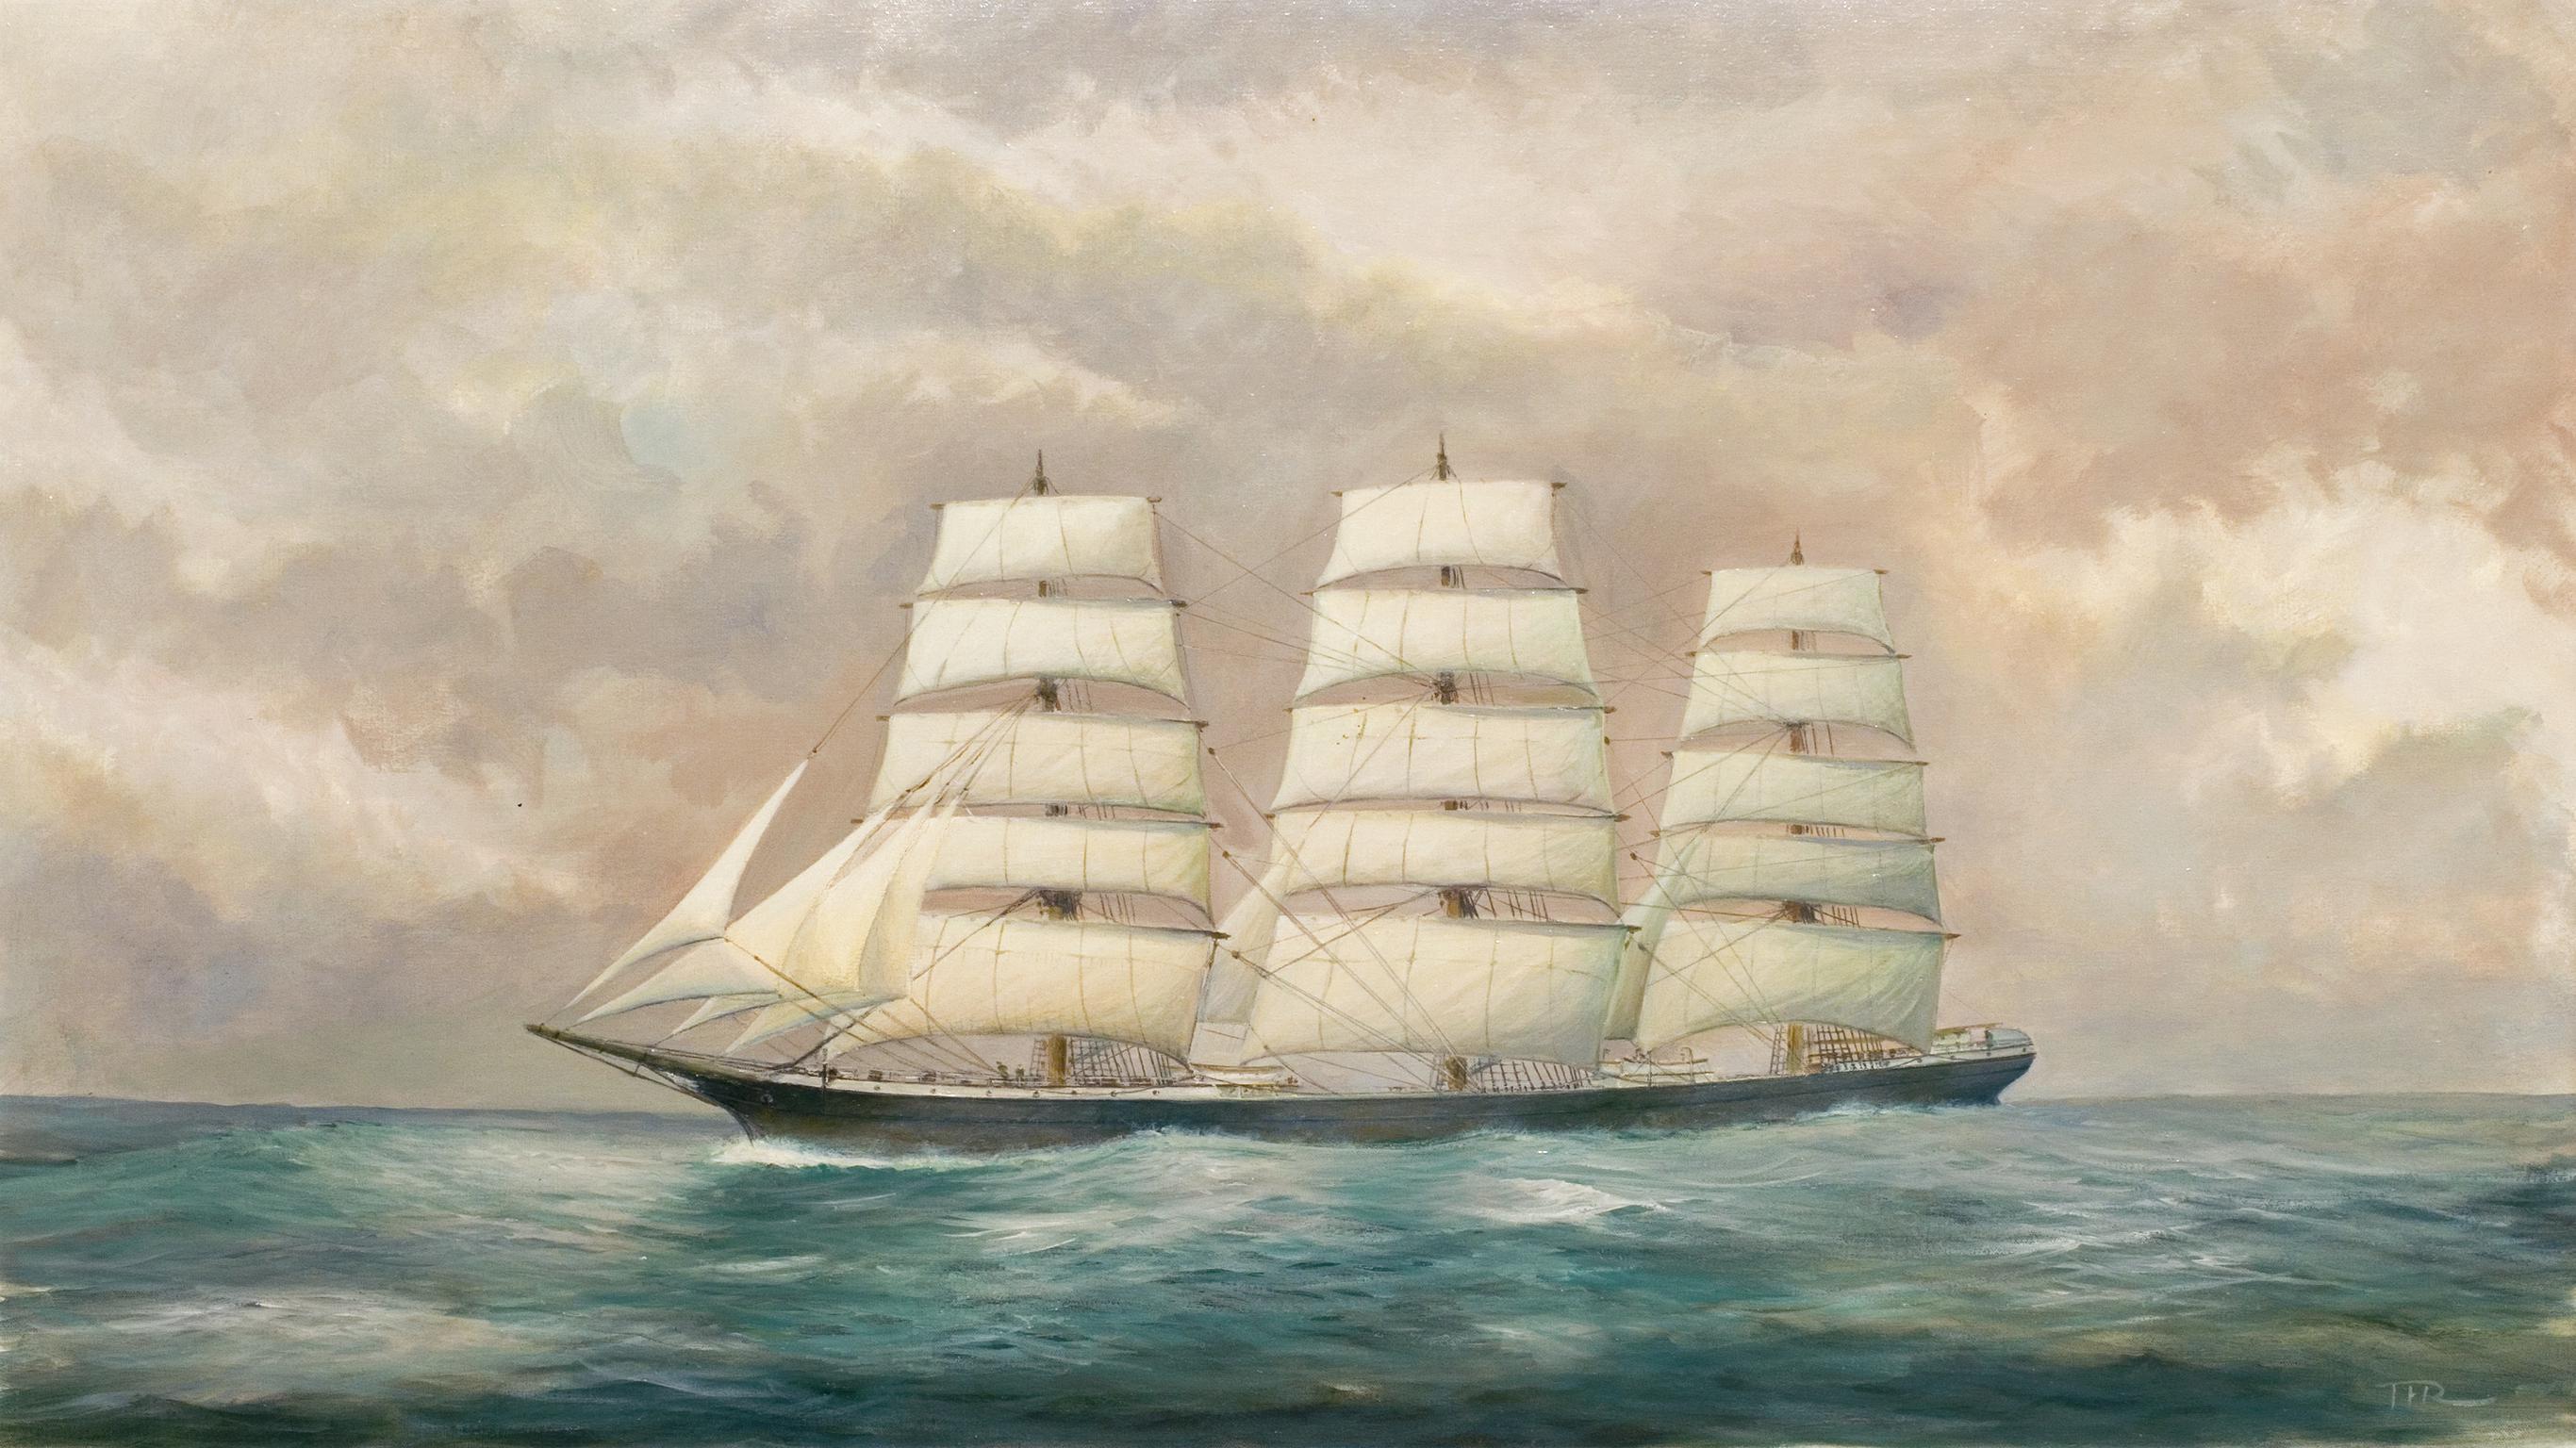 BAY OF BISCAY (painting)